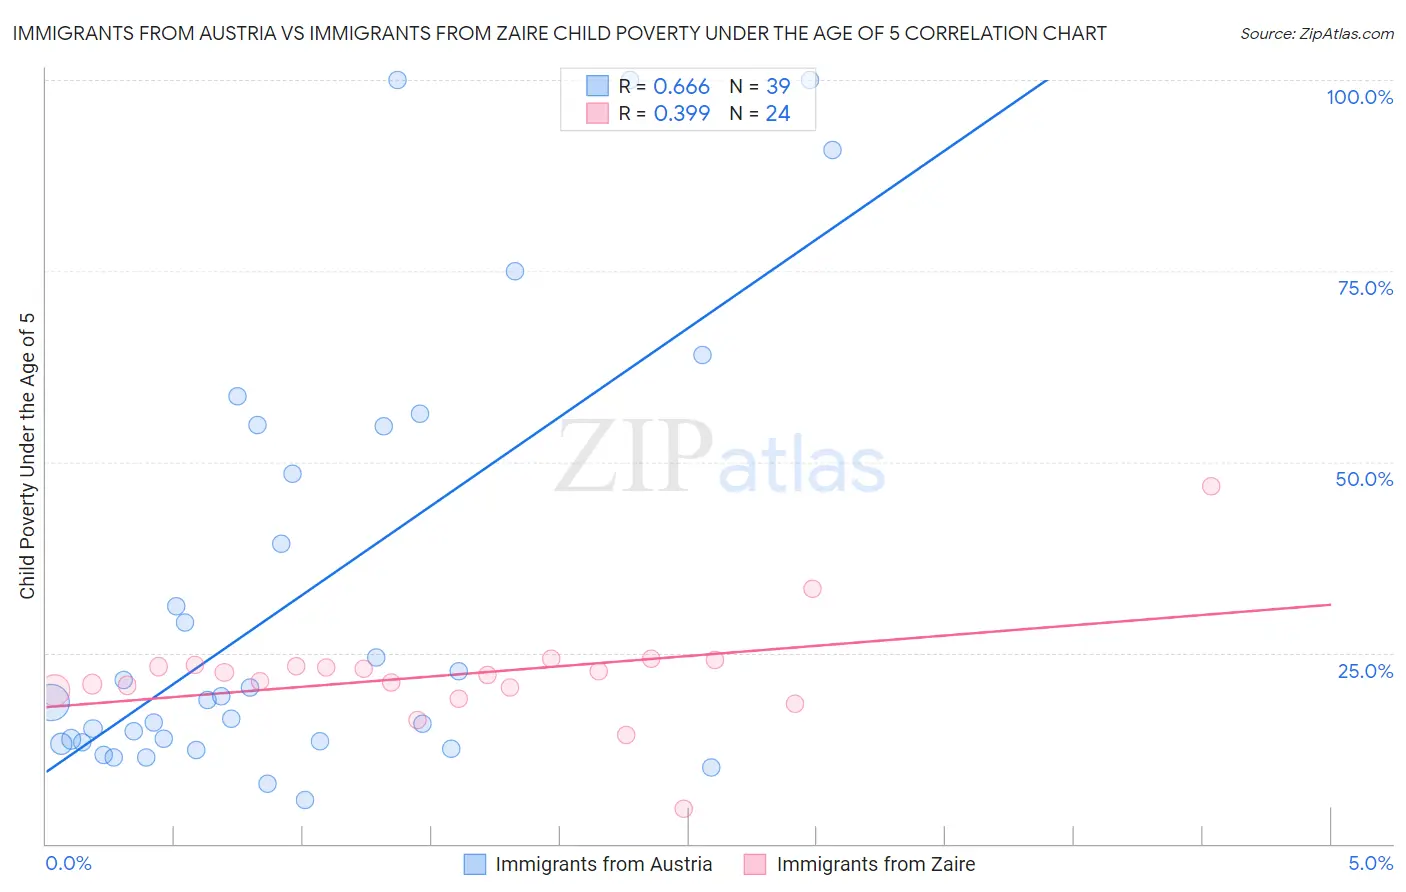 Immigrants from Austria vs Immigrants from Zaire Child Poverty Under the Age of 5